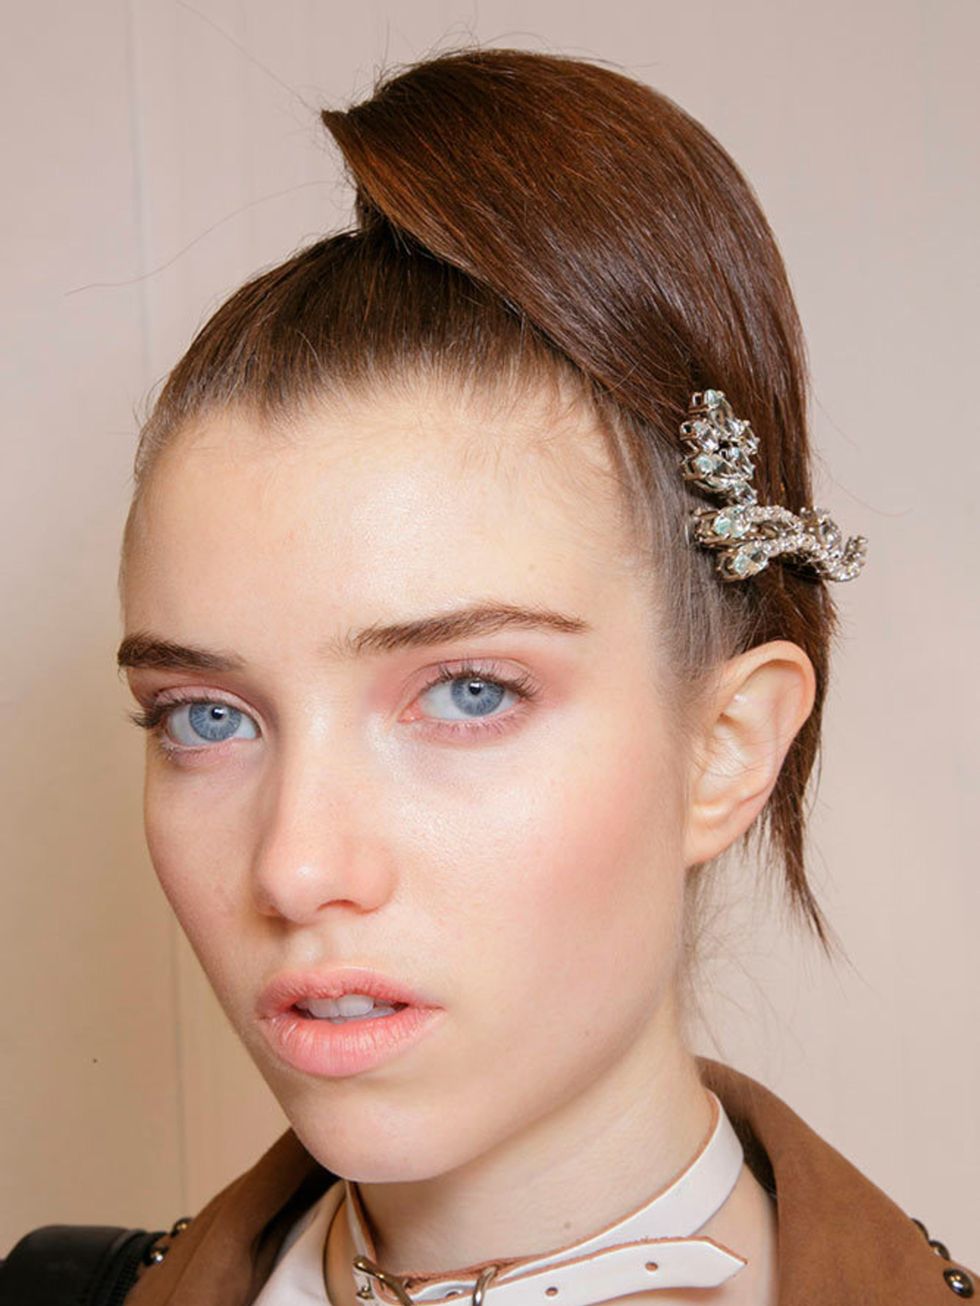 <p><a href="http://www.elleuk.com/catwalk/prada/autumn-winter-2015"><strong>Prada</strong></a></p>

<p>The look: Adorned updo</p>

<p>Hair stylist: <a href="http://www.elleuk.com/beauty/the-beauty-experts-you-need-to-know-charlotte-tilbury-backstage-beaut